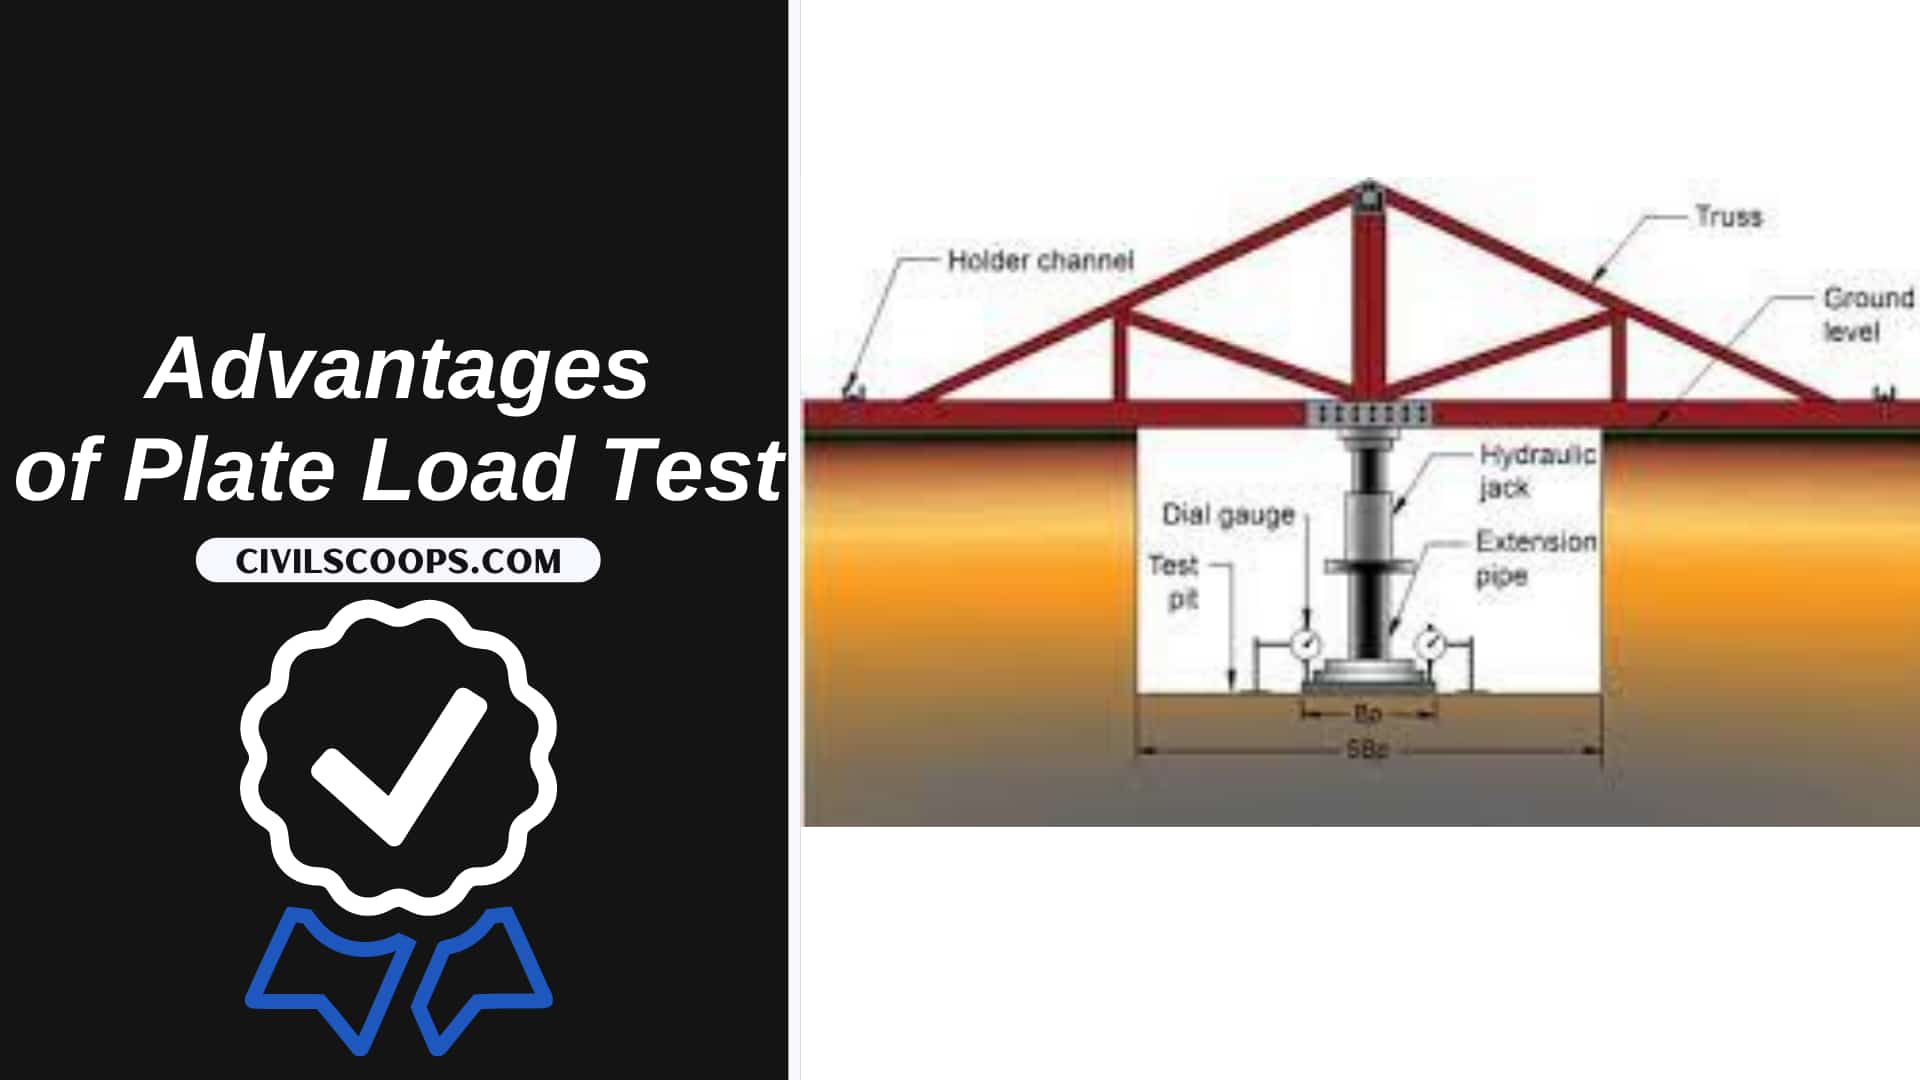 Advantages of Plate Load Test